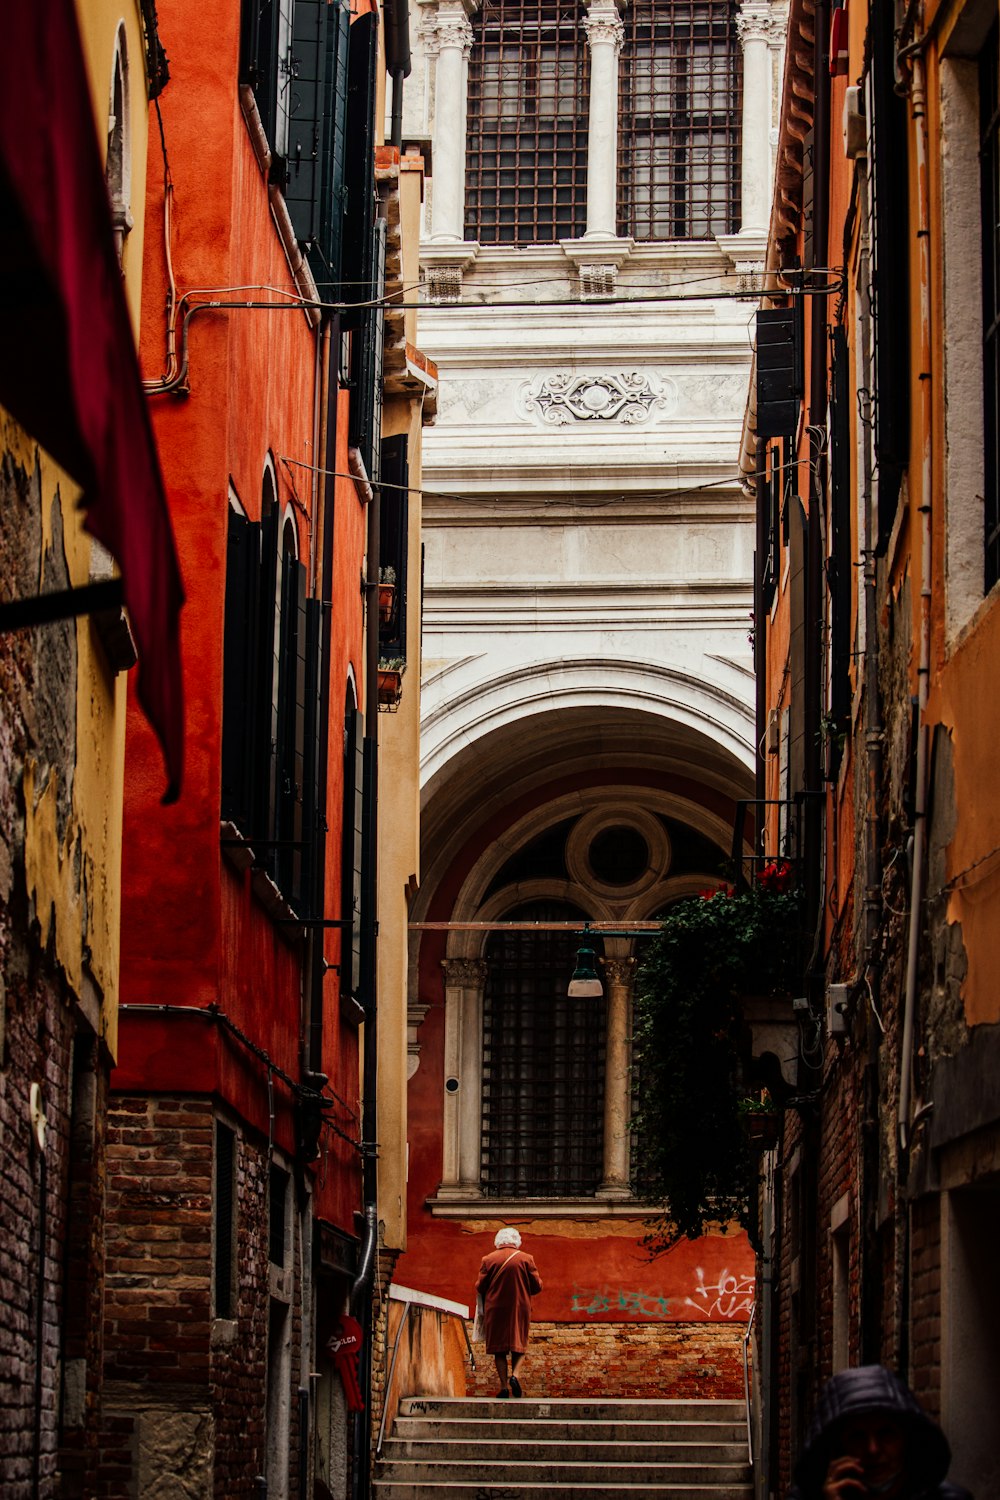 a narrow alleyway with a person walking down it